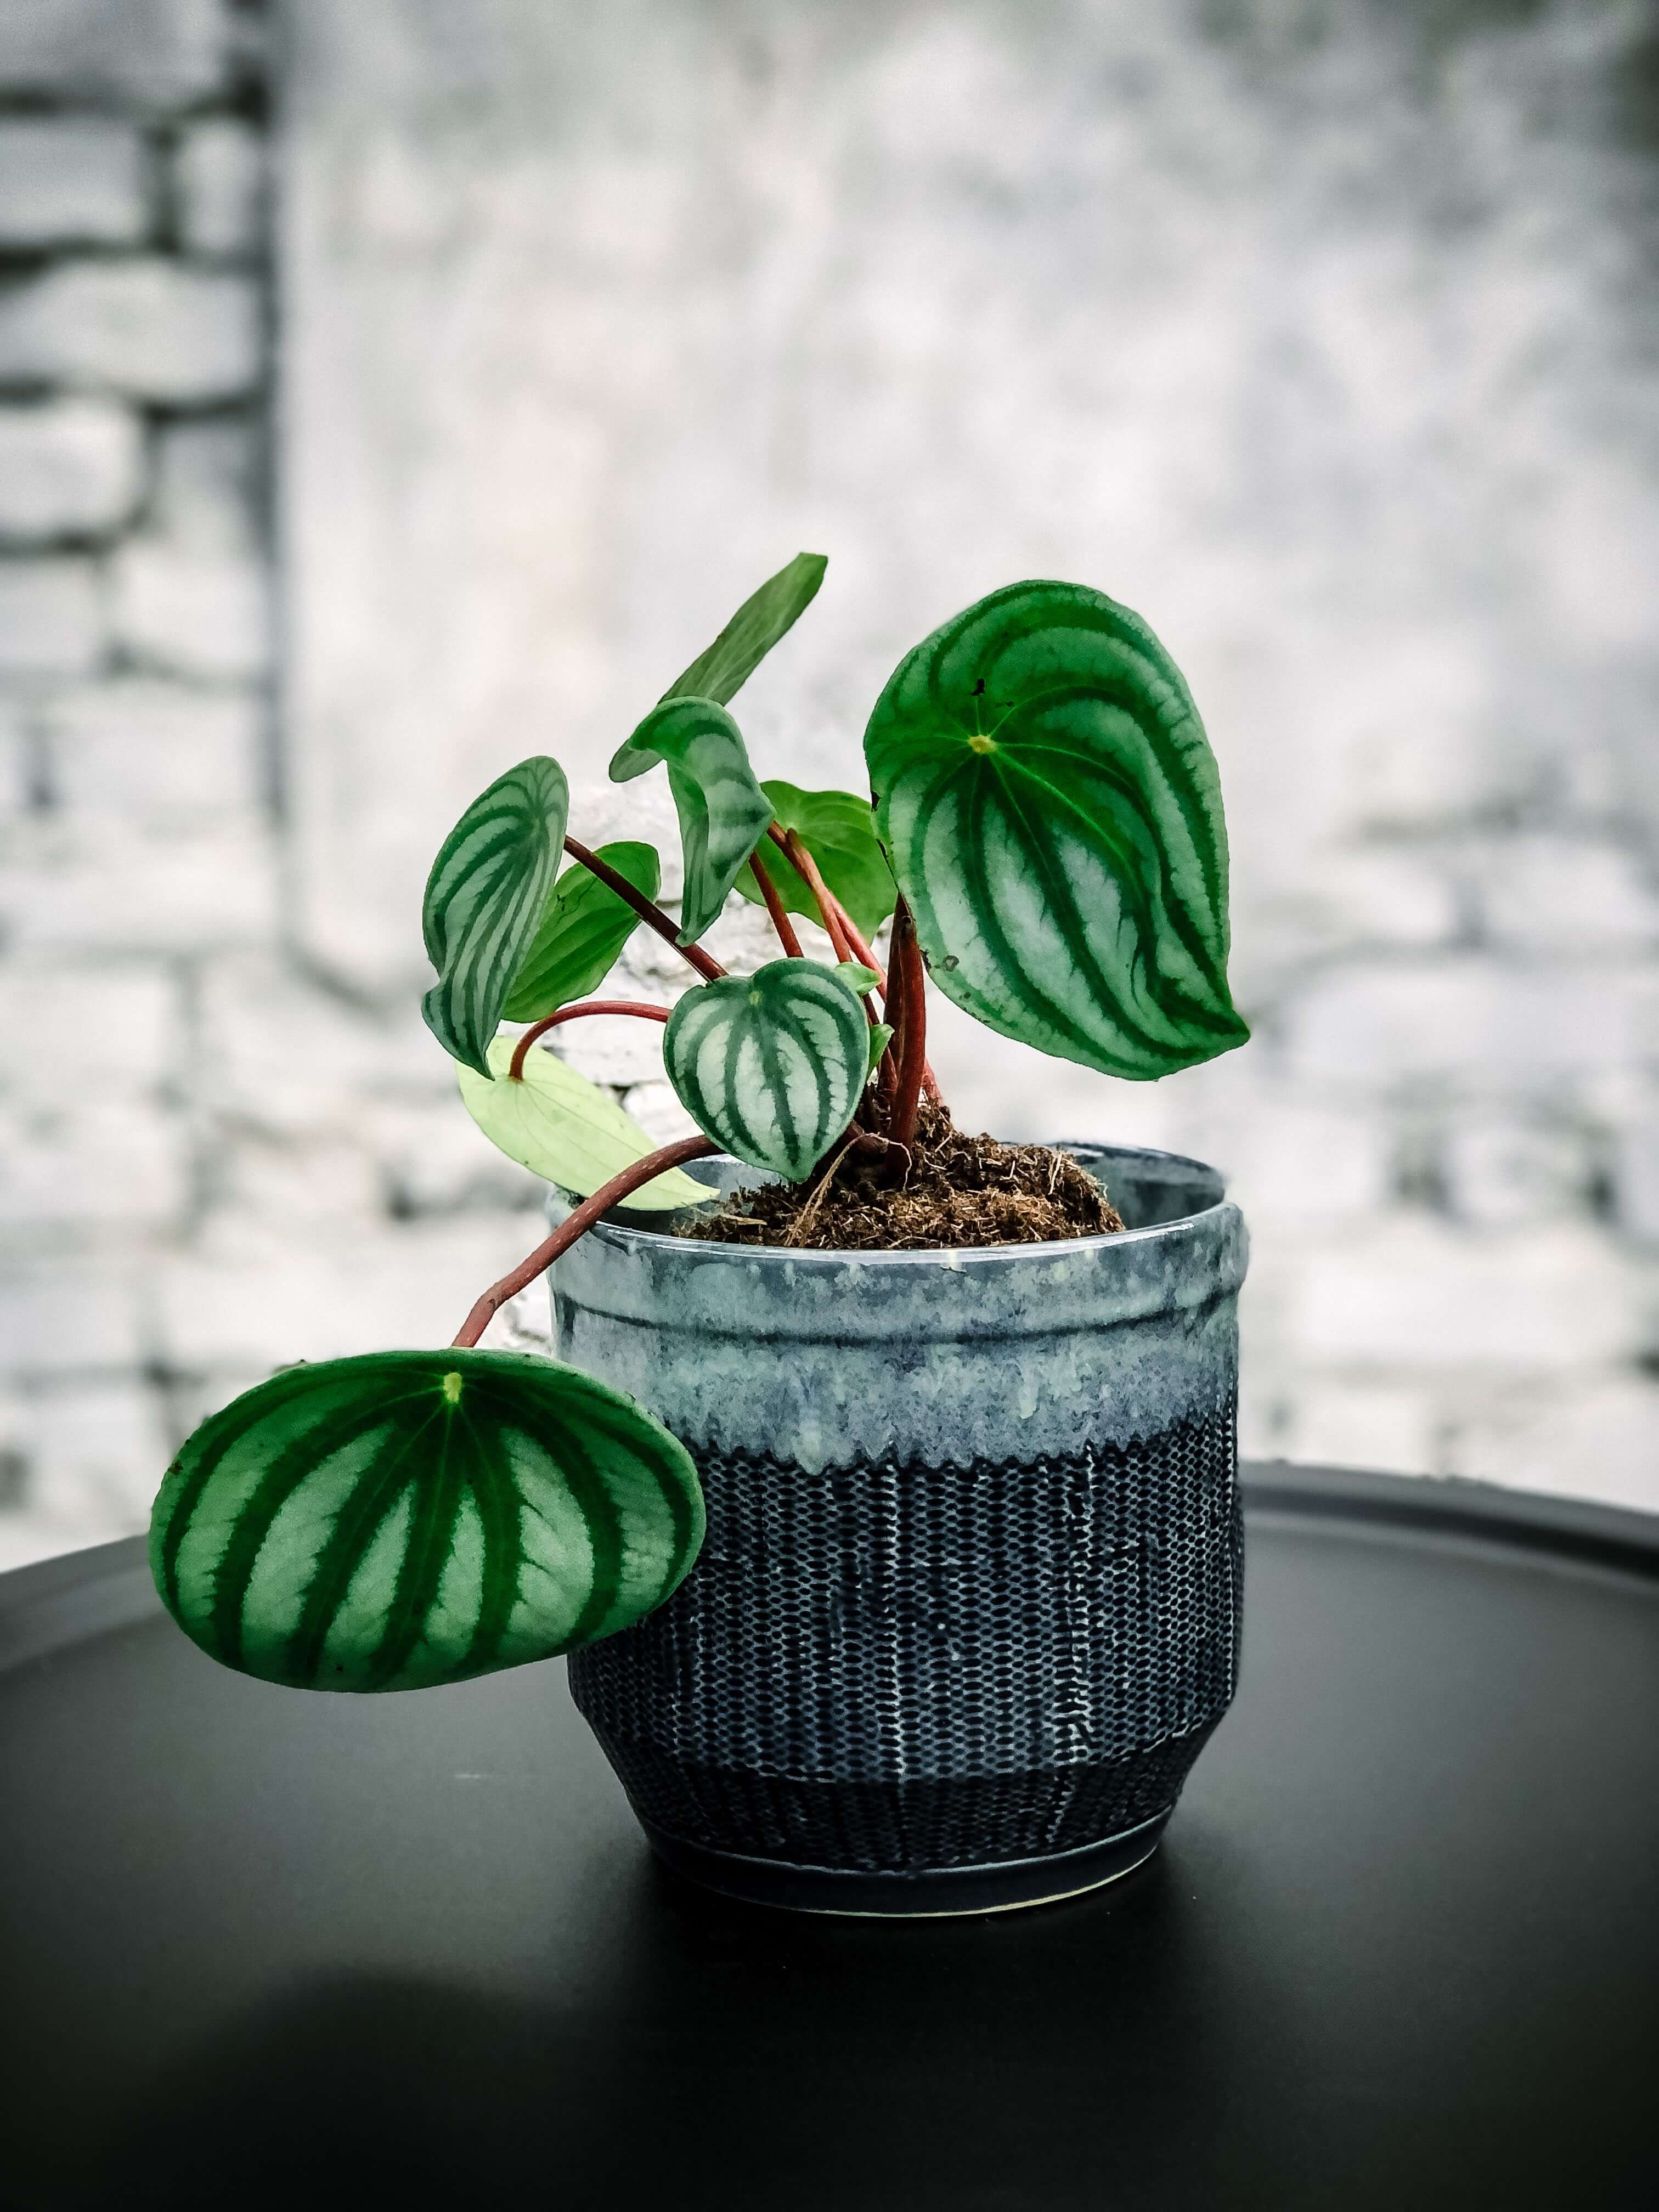 Limited! Watermelon Peperomia